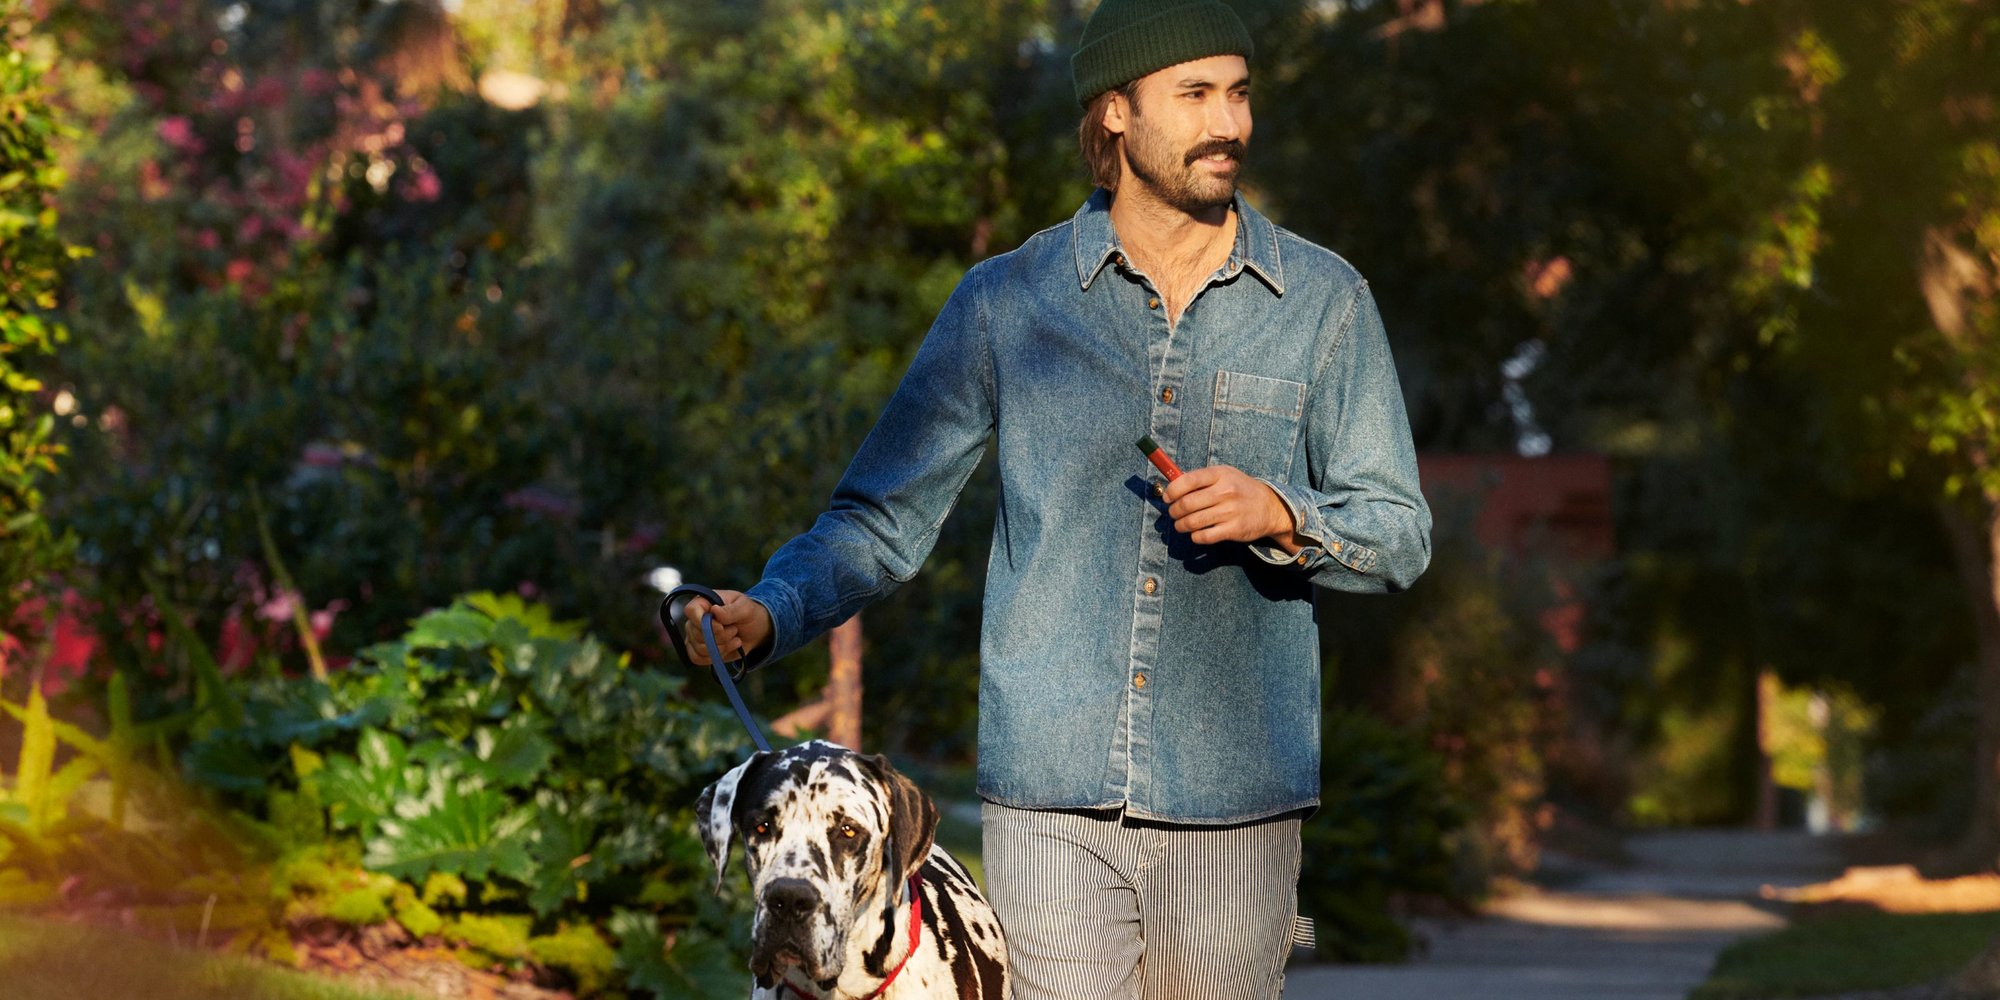 A guy with a beanie and mustache out walking his Dalmatian using a Pax Era